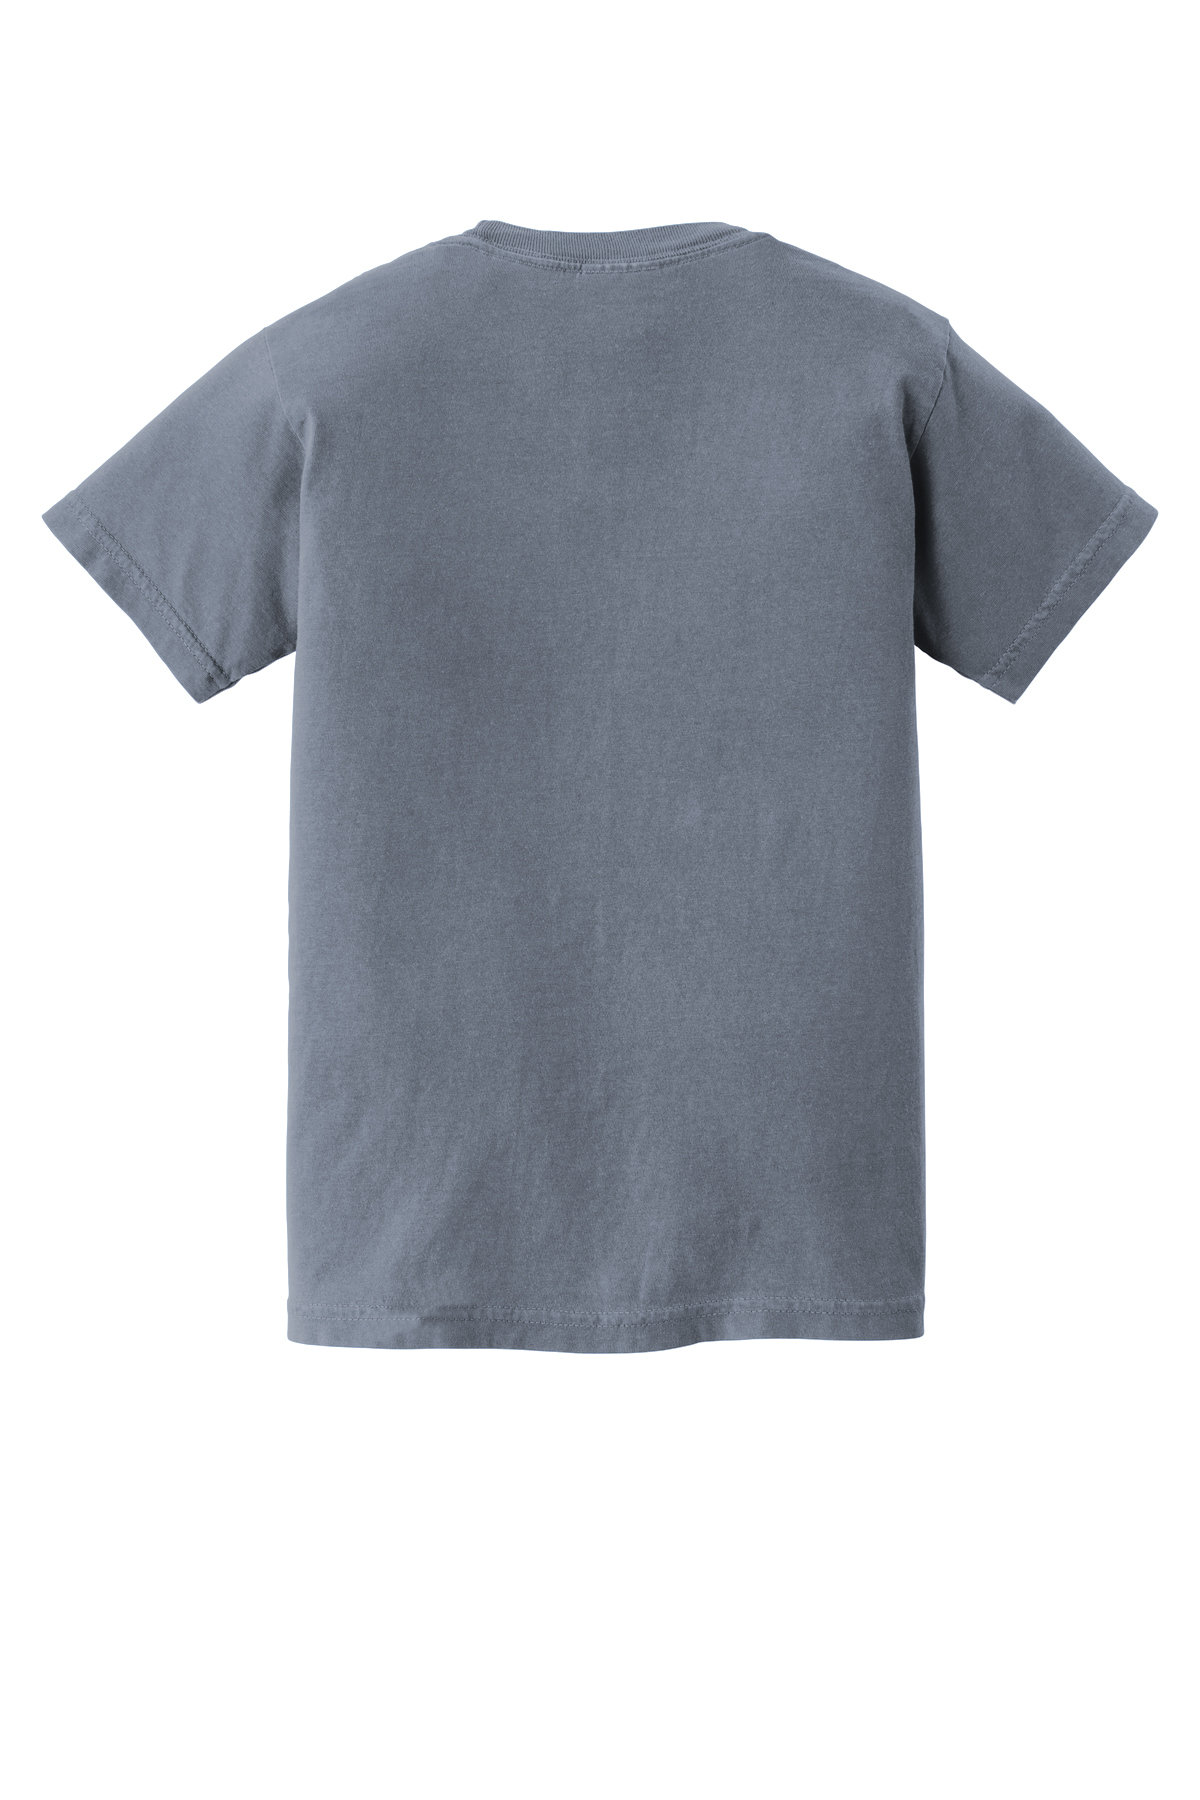 Comfort Colors Youth Heavyweight Ring Spun Tee | Product | Company Casuals